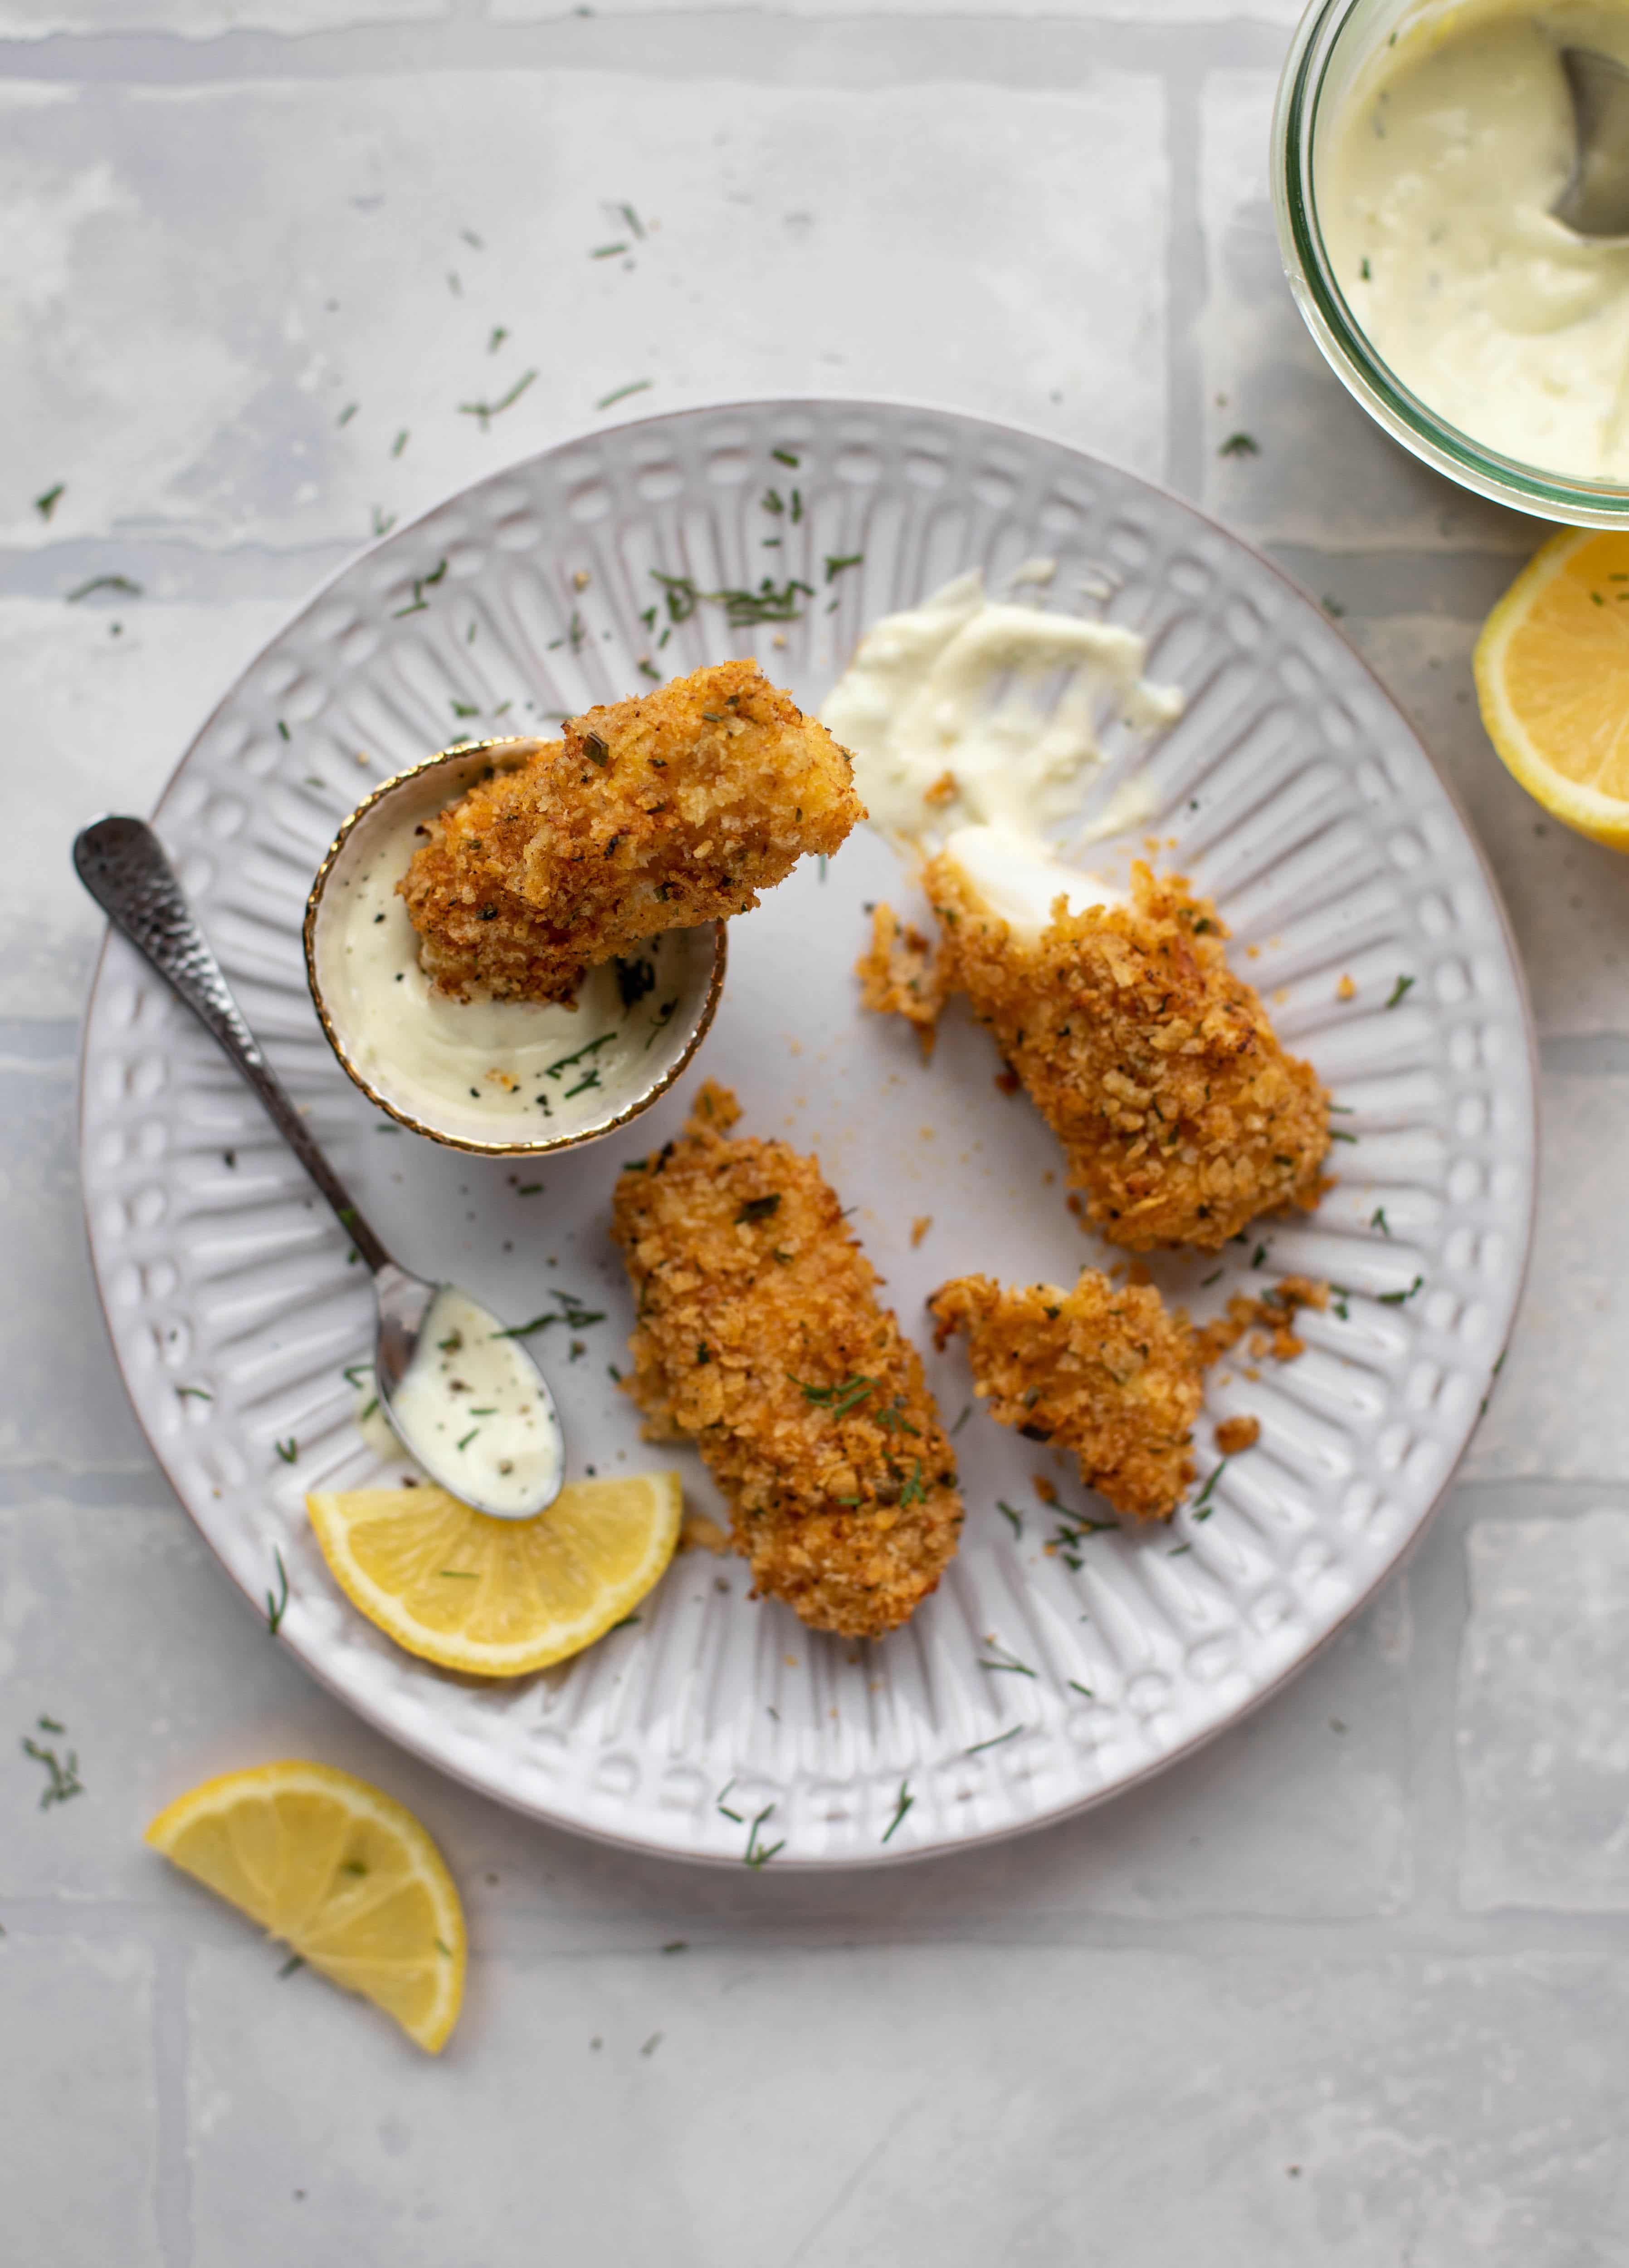 These crispy homemade fish sticks are flavored with lemon and garlic! They are super crunchy and delicious when dipped in the jalapeo tartar sauce.